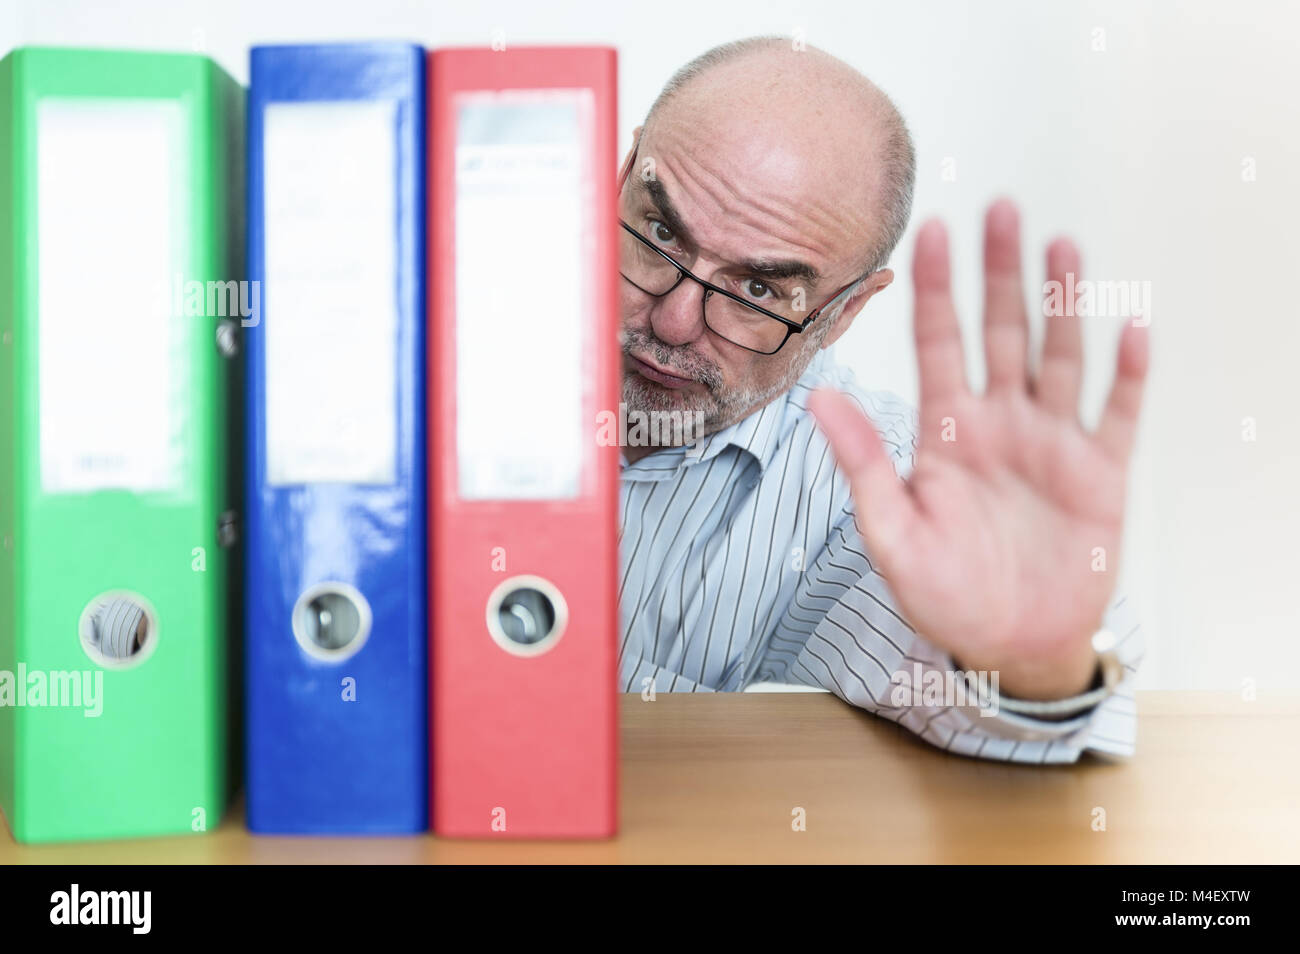 An official hides behind his files and signals rejection. Stock Photo